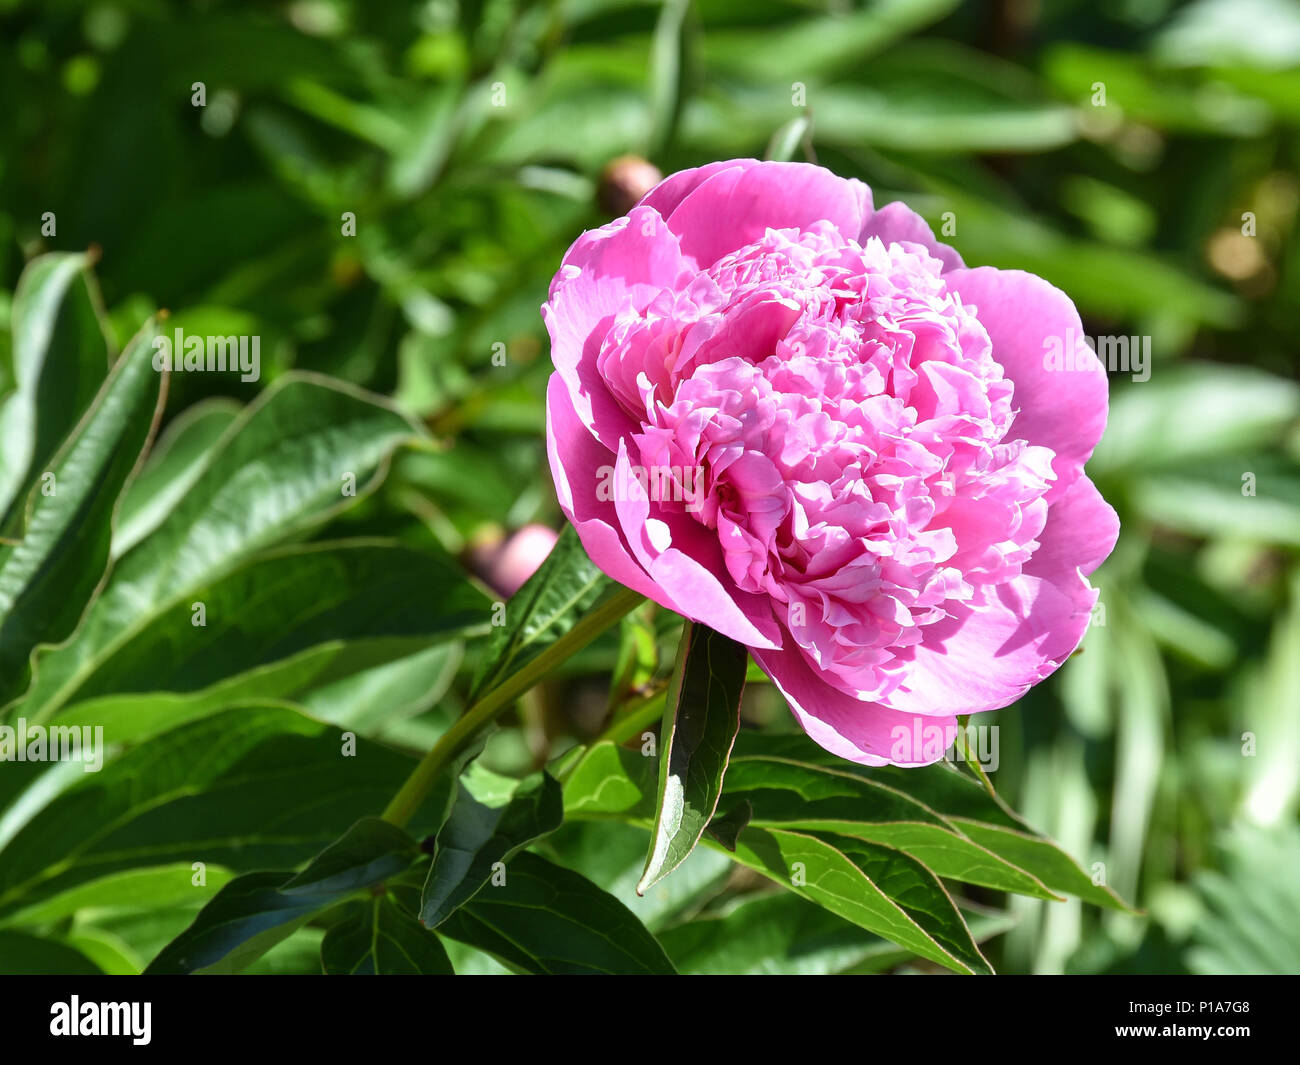 a pink rose with a green bush in the background Stock Photo